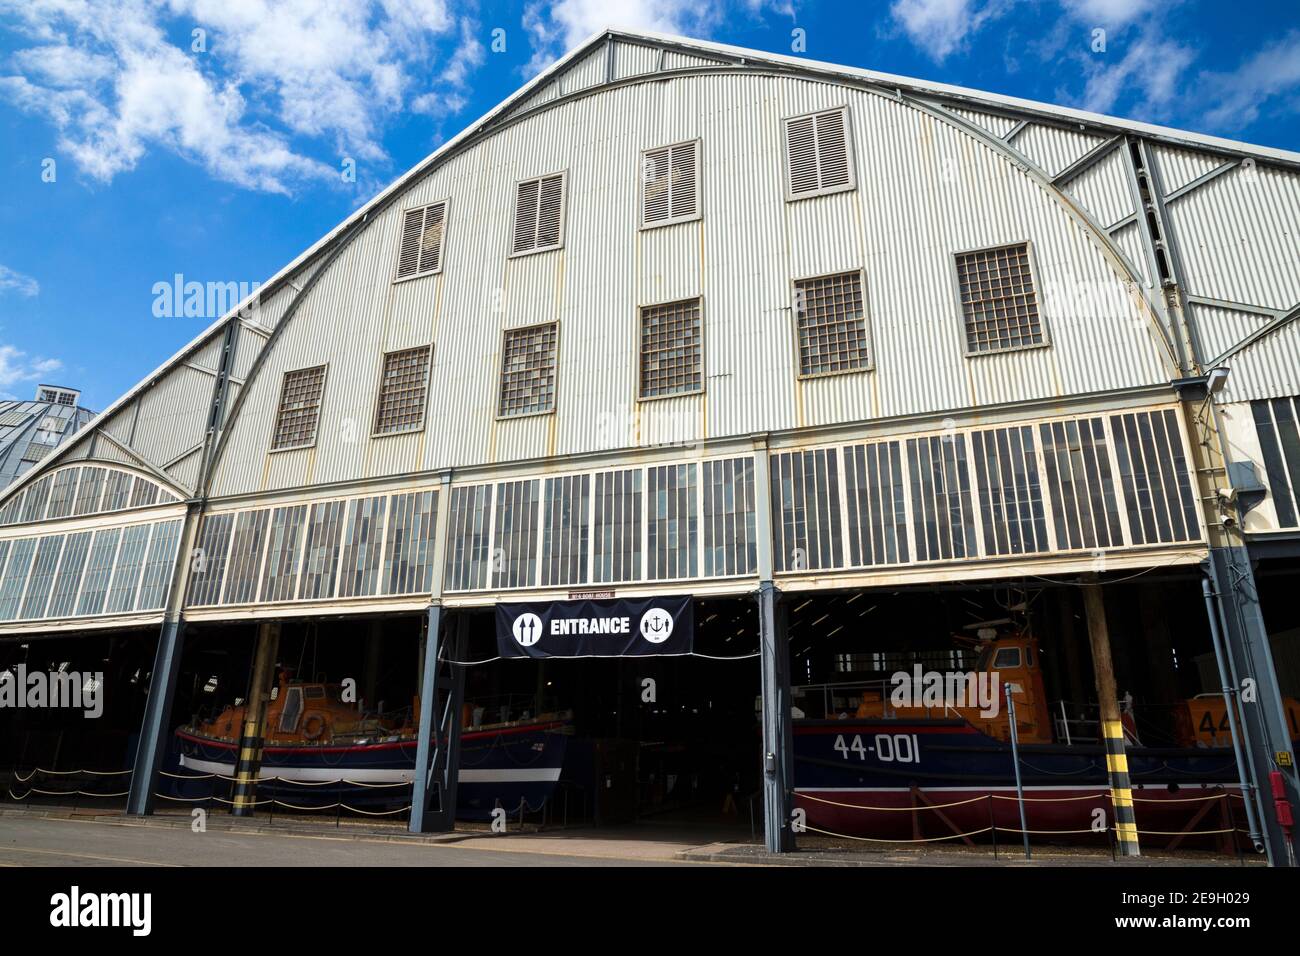 Front facade & entrance to the Number 4 boathouse (covered slip) which houses RNLI HISTORIC LIFEBOAT COLLECTION: UK's largest collection of RNLI Life boats. Chatham historic dockyard England UK (121) Stock Photo